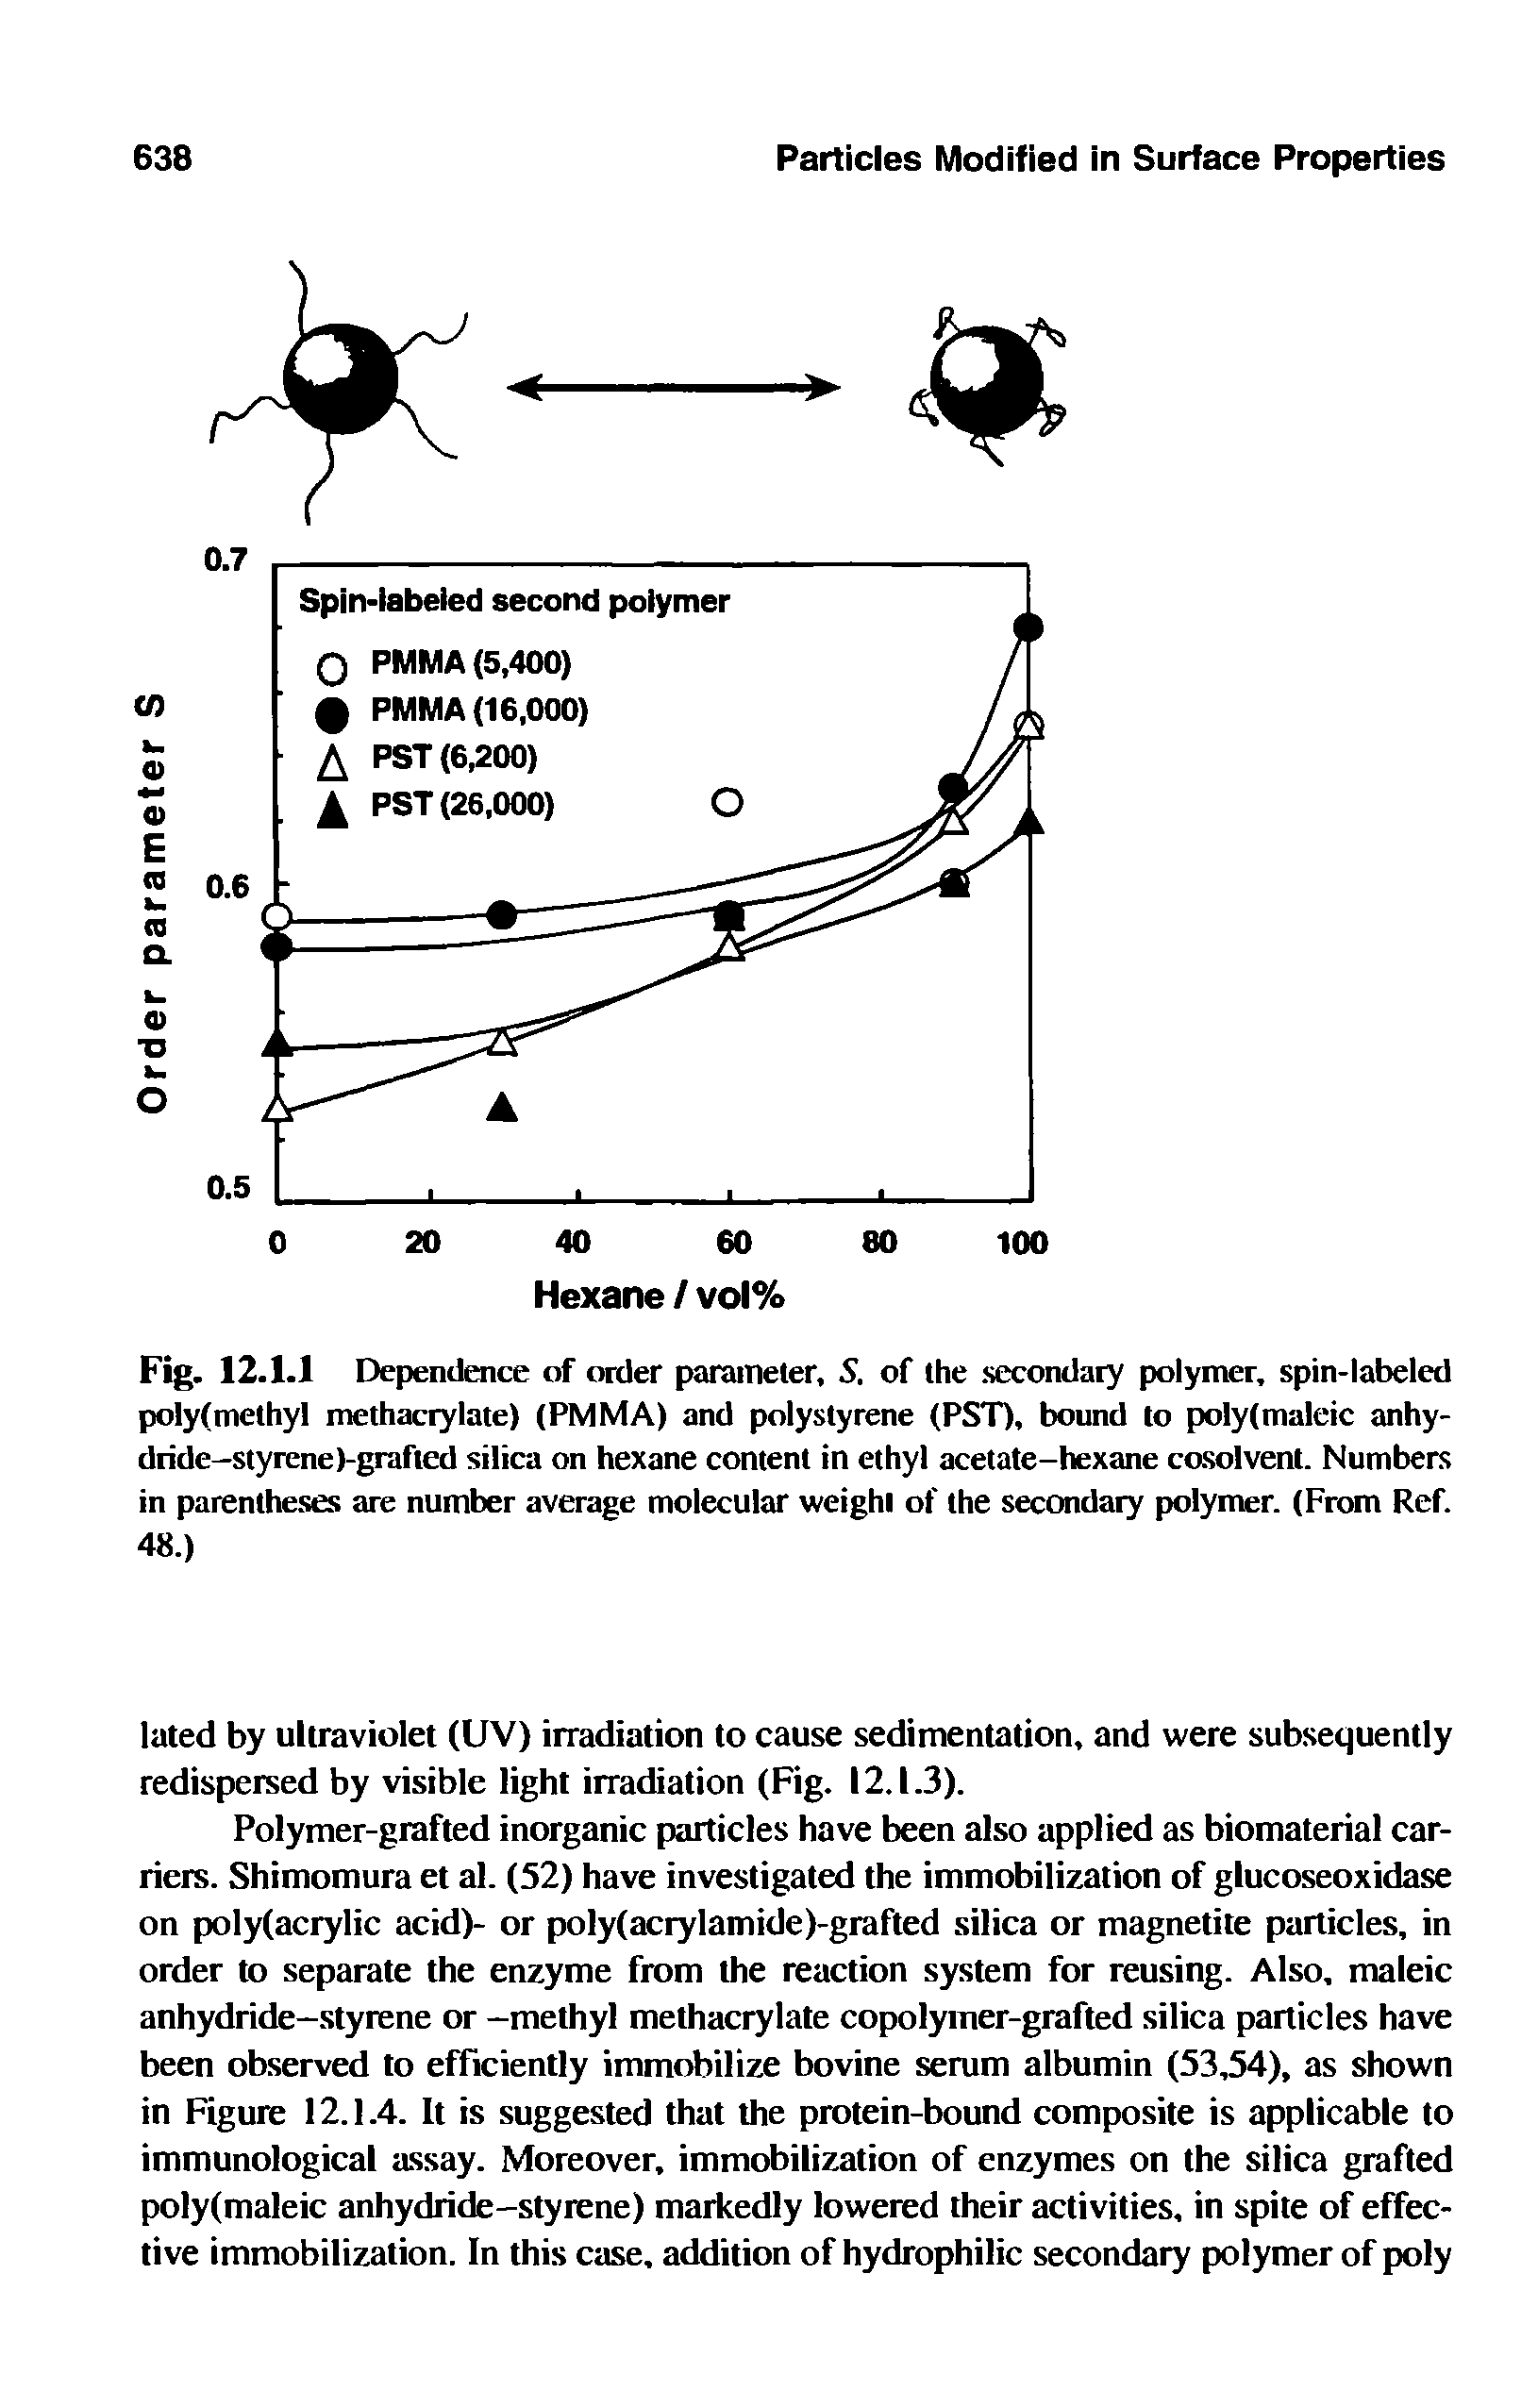 Fig. 12.1.1 Dependence of order parameter, S. of the secondary polymer, spin-labeled poly (methyl methacrylate) (PMMA) and polystyrene (PST), bound to poly(maleic anhydride—styrene )-grafted silica on hexane content in ethyl acetate-hexane cosolvent. Numbers in parentheses are number average molecular weight of the secondary polymer. (From Ref. 48.)...